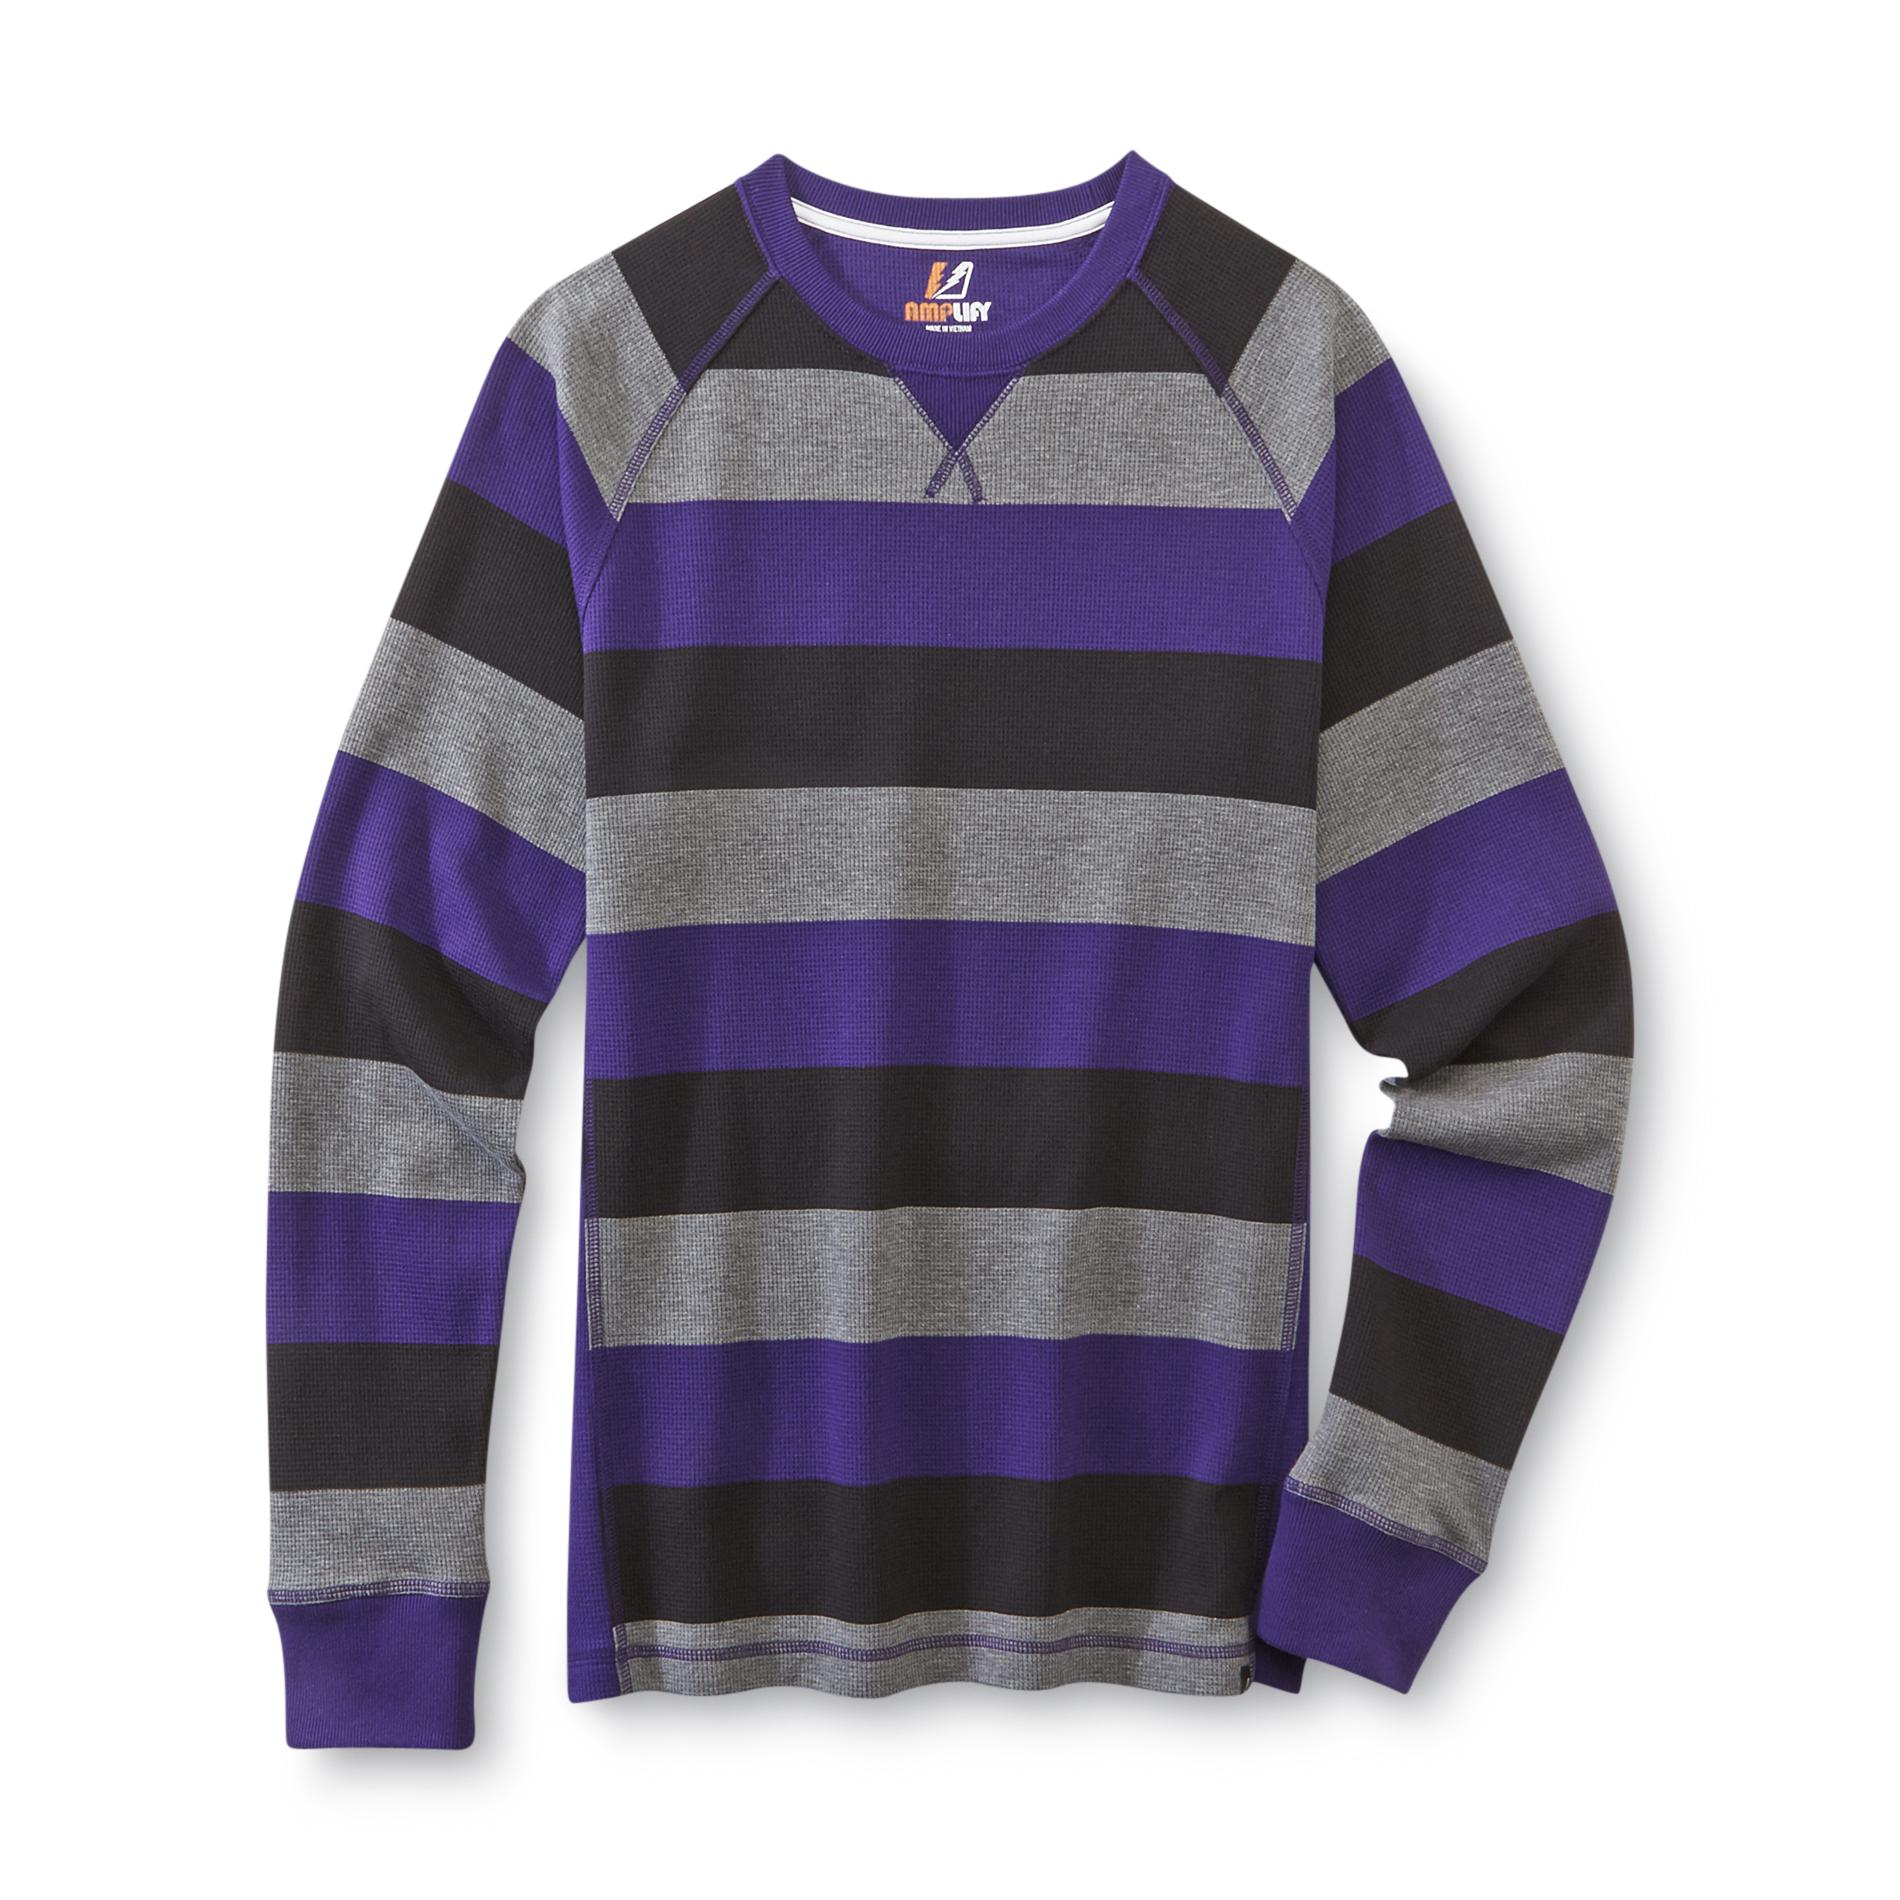 Amplify Young Men's Long-Sleeve Thermal Shirt - Striped